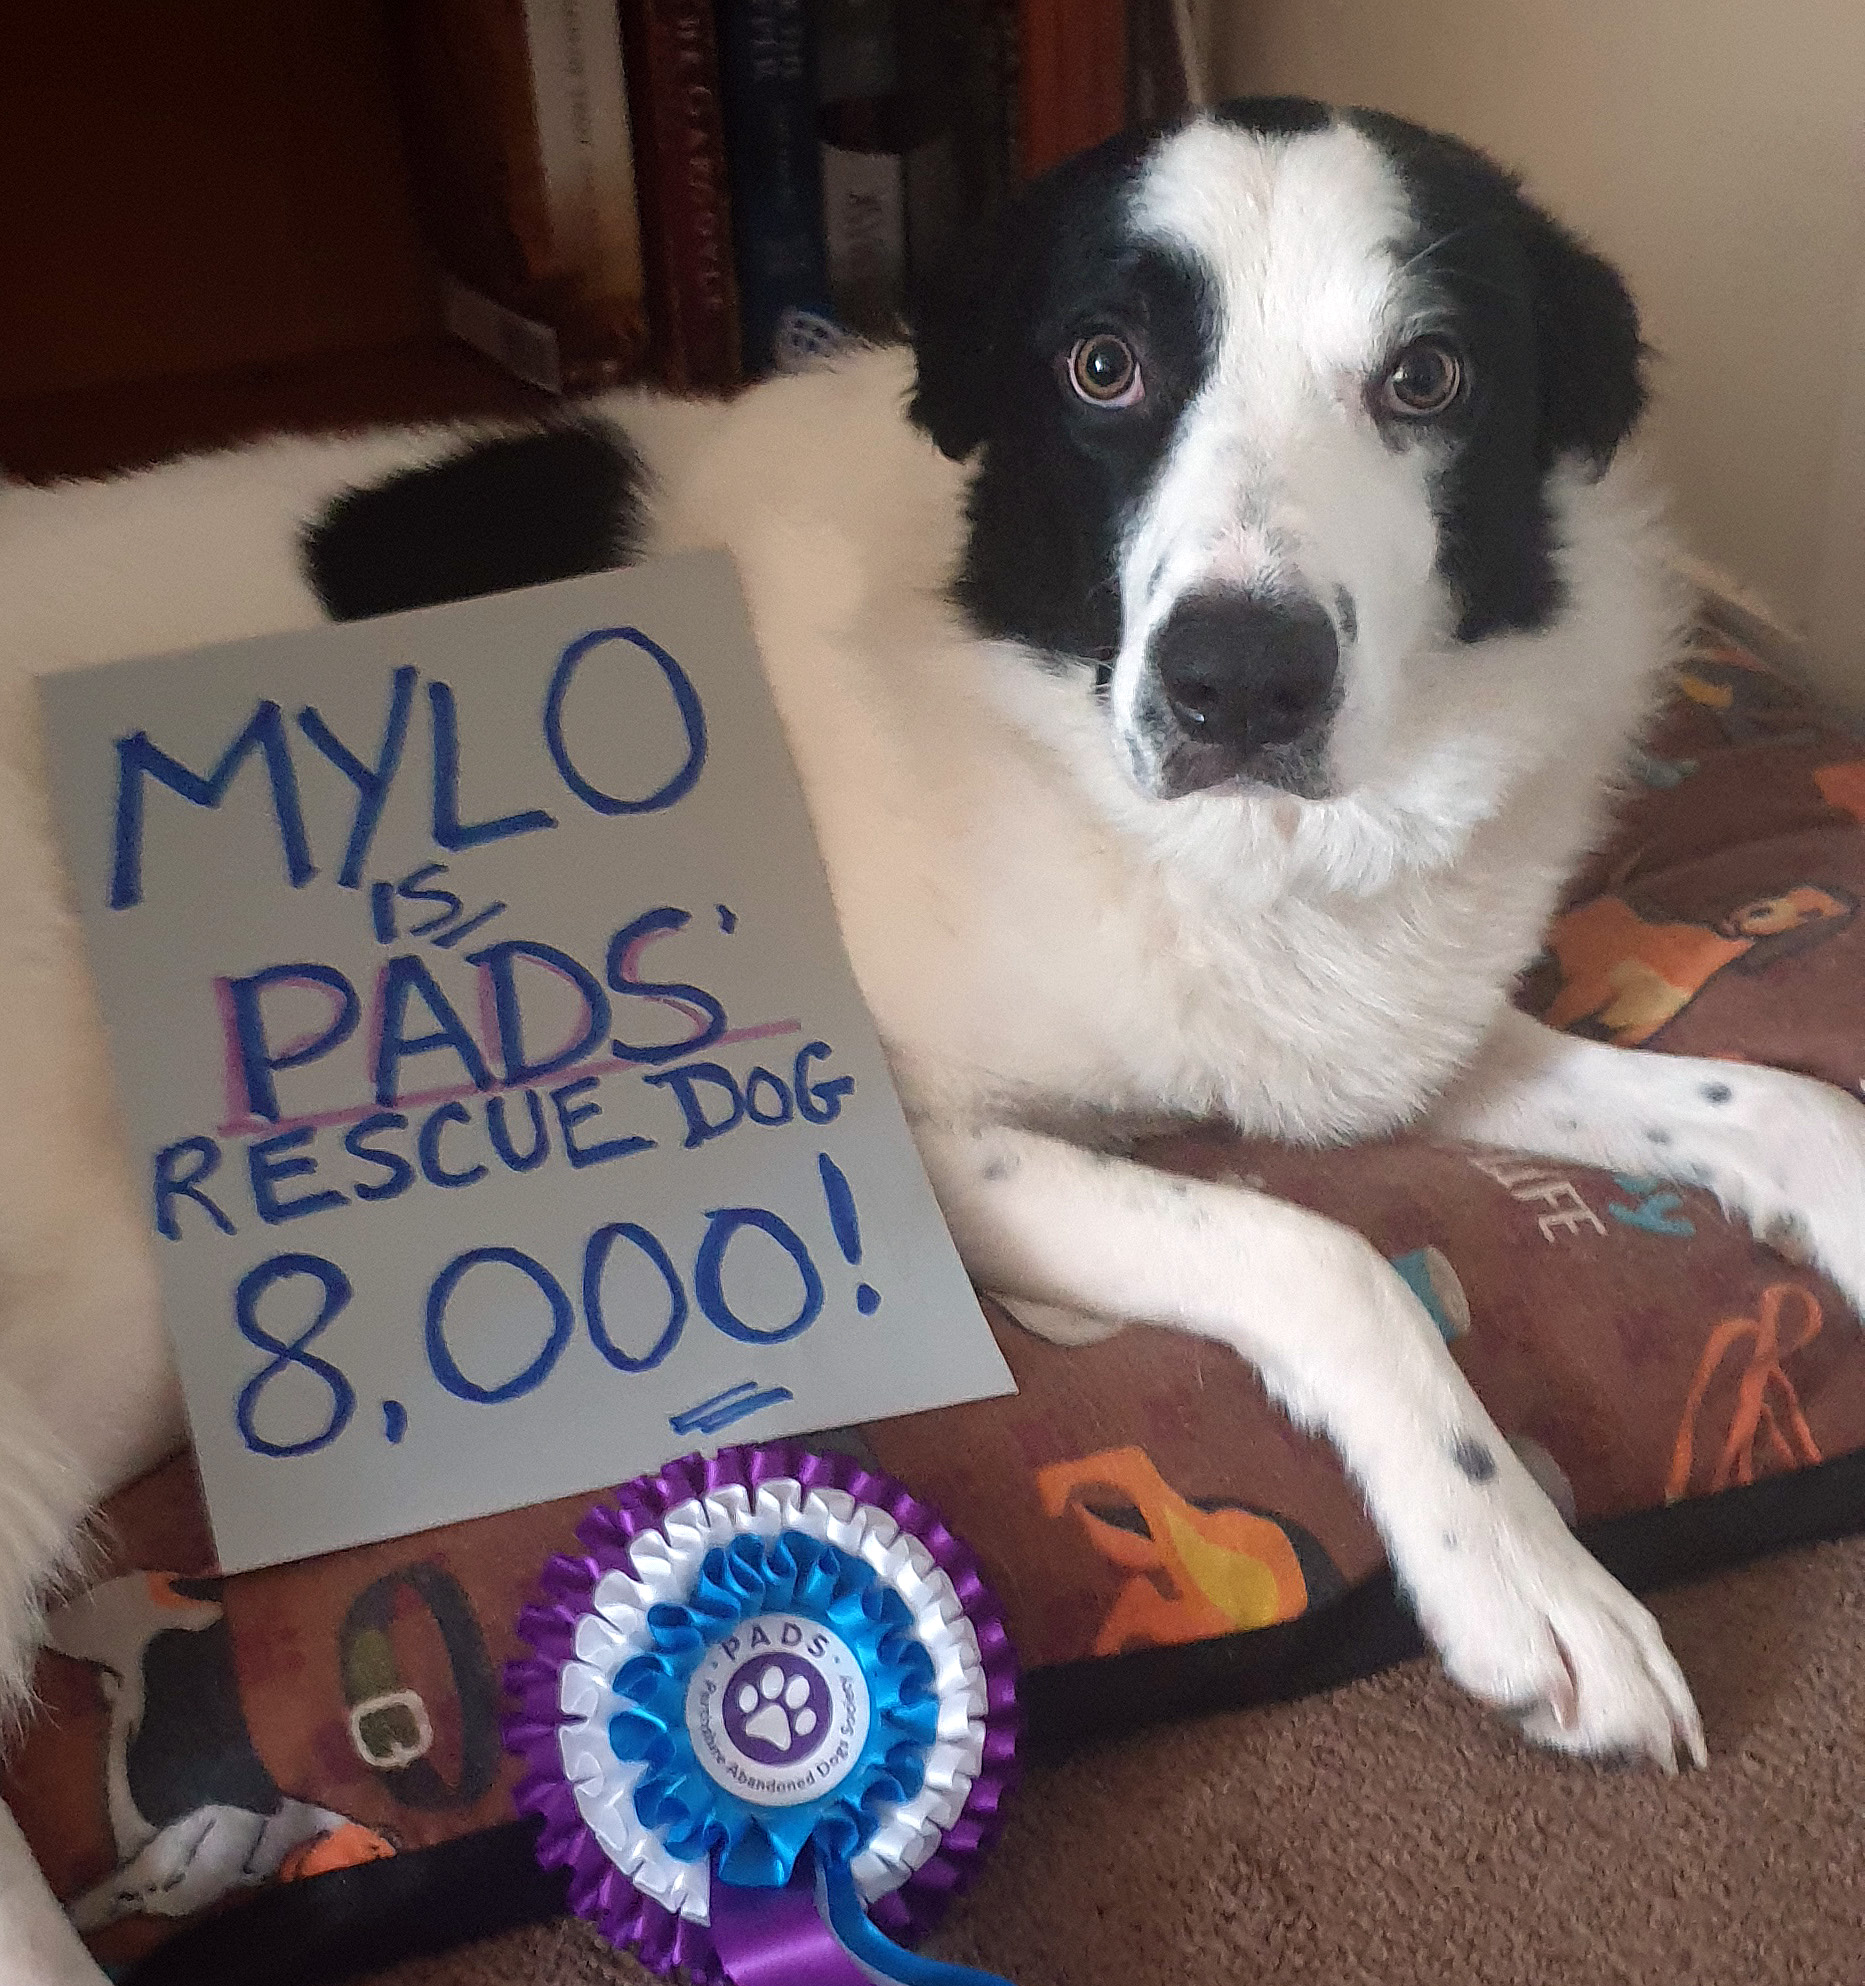 Mylo became the 8,000th dog to be rehomed by PADS.